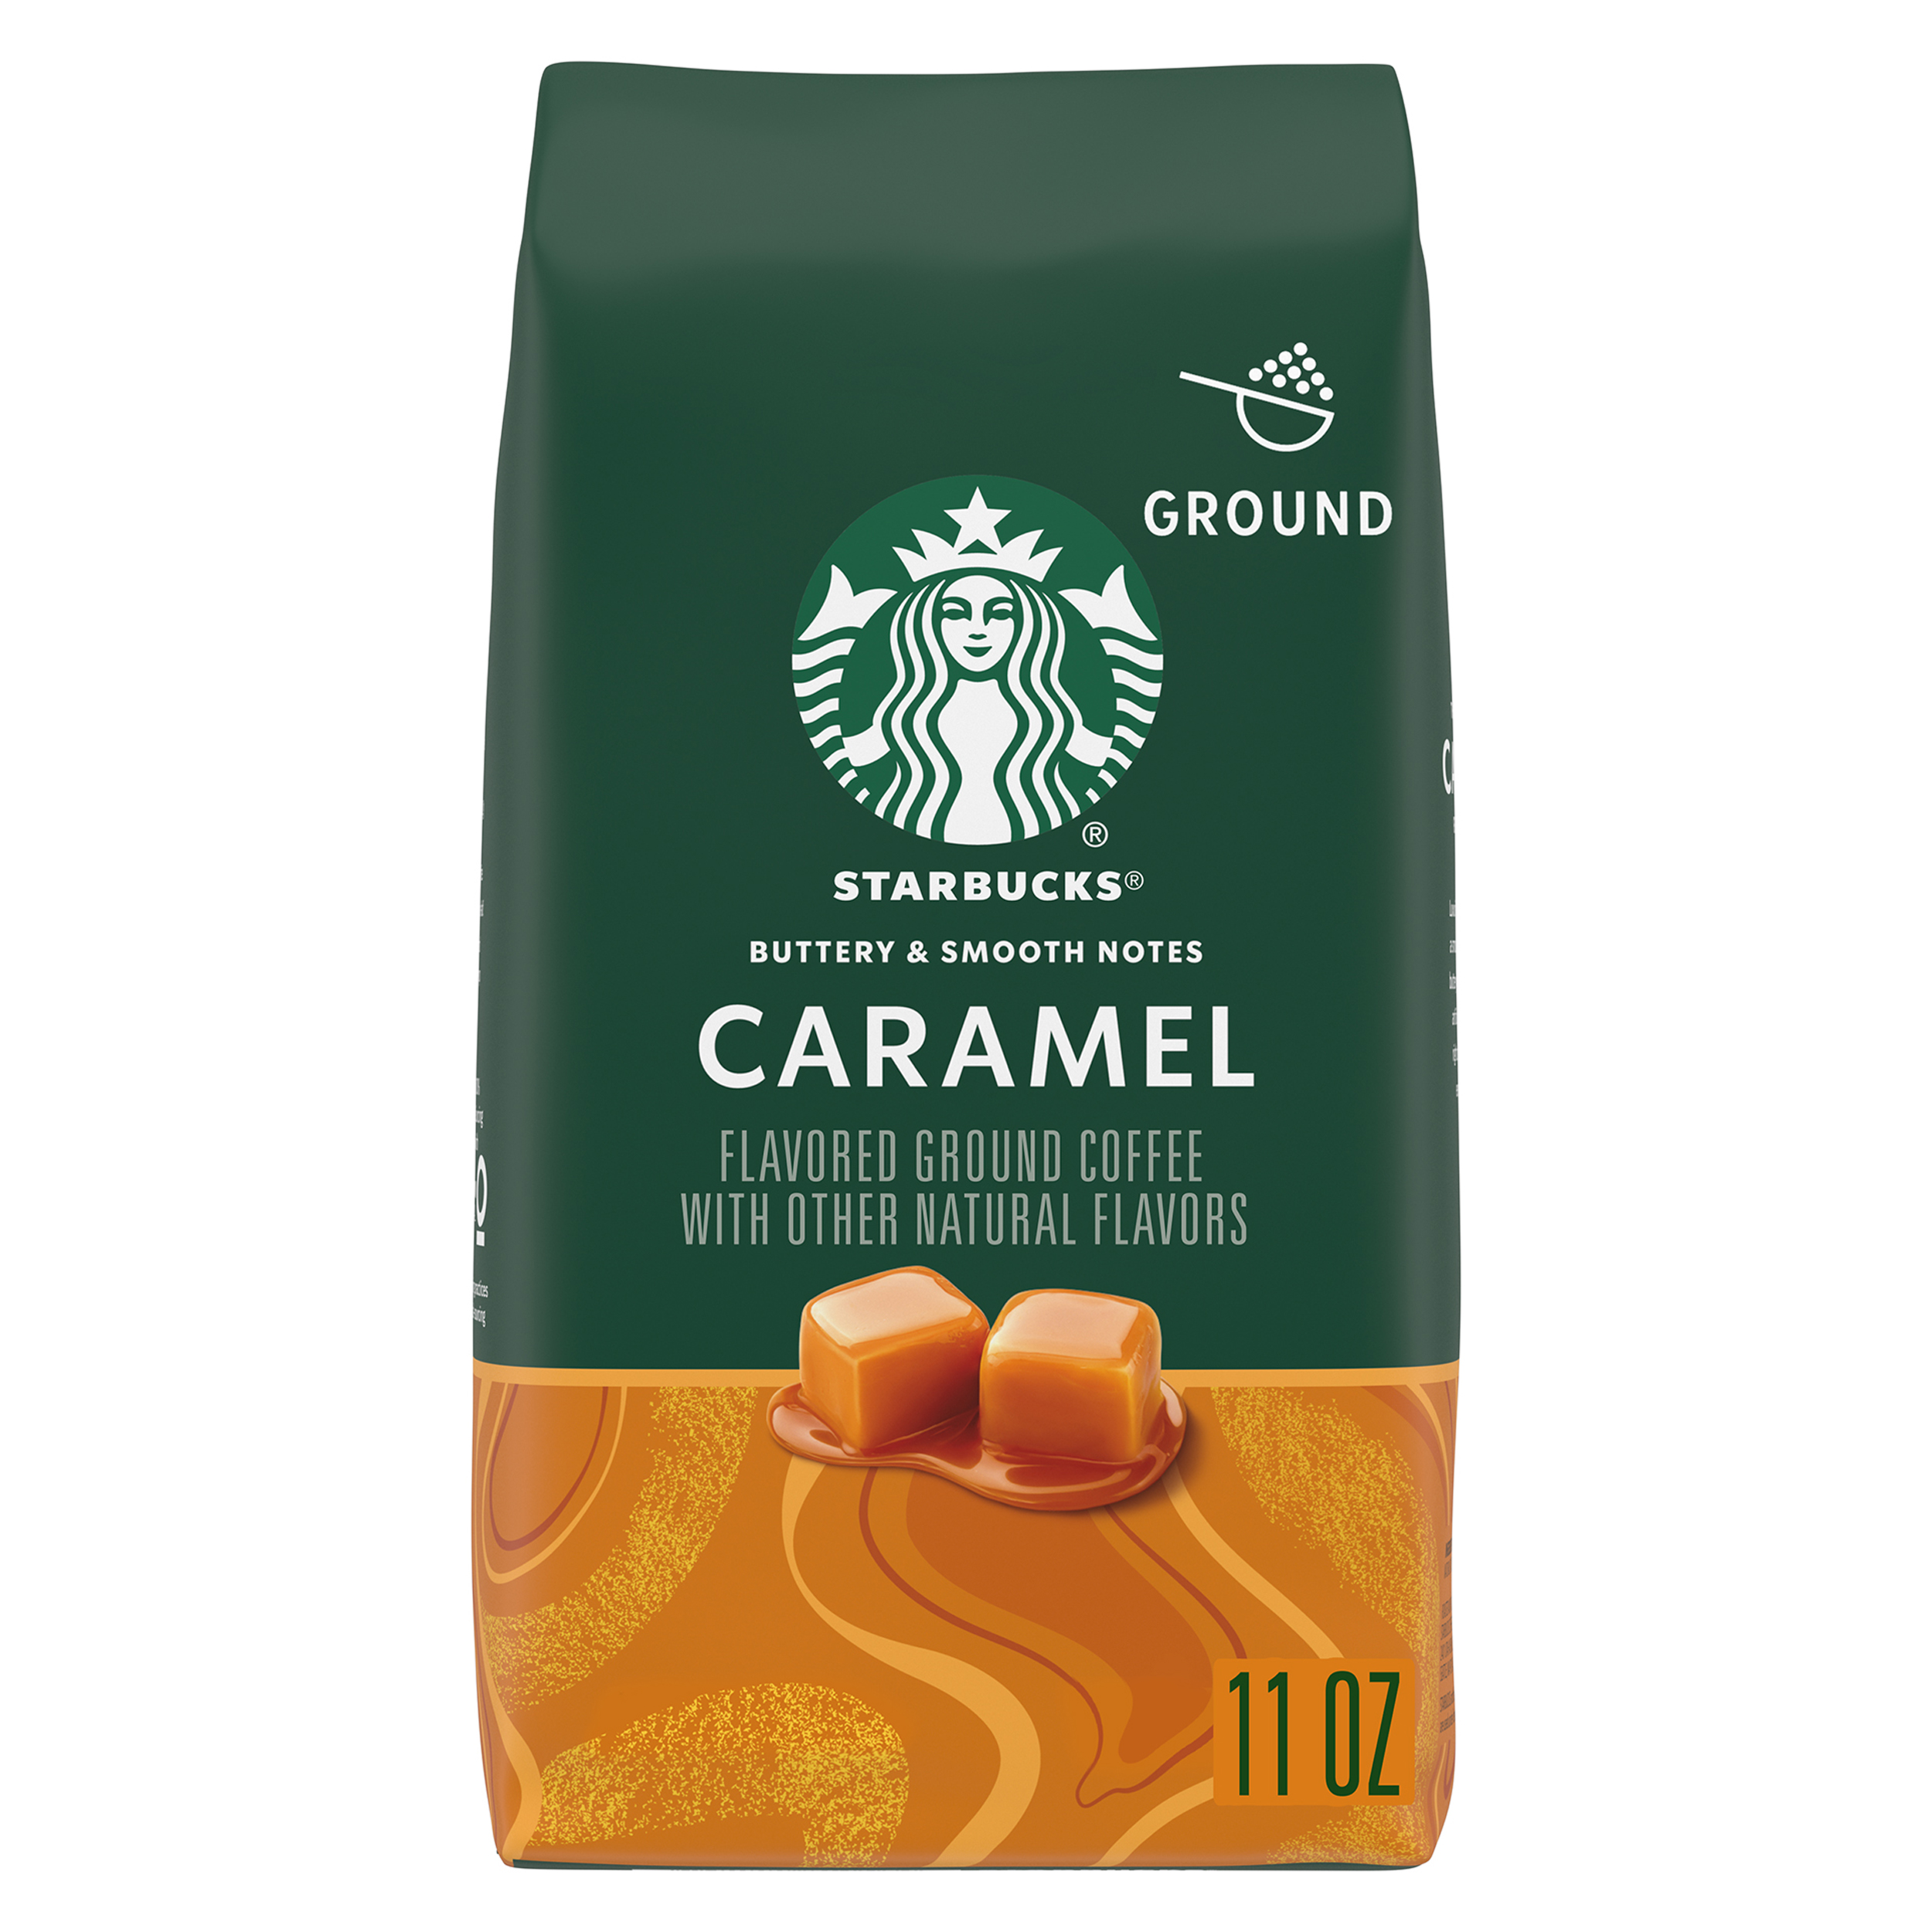 Starbucks Arabica Beans Caramel, Naturally Flavored, Ground Coffee, 11oz - image 1 of 8